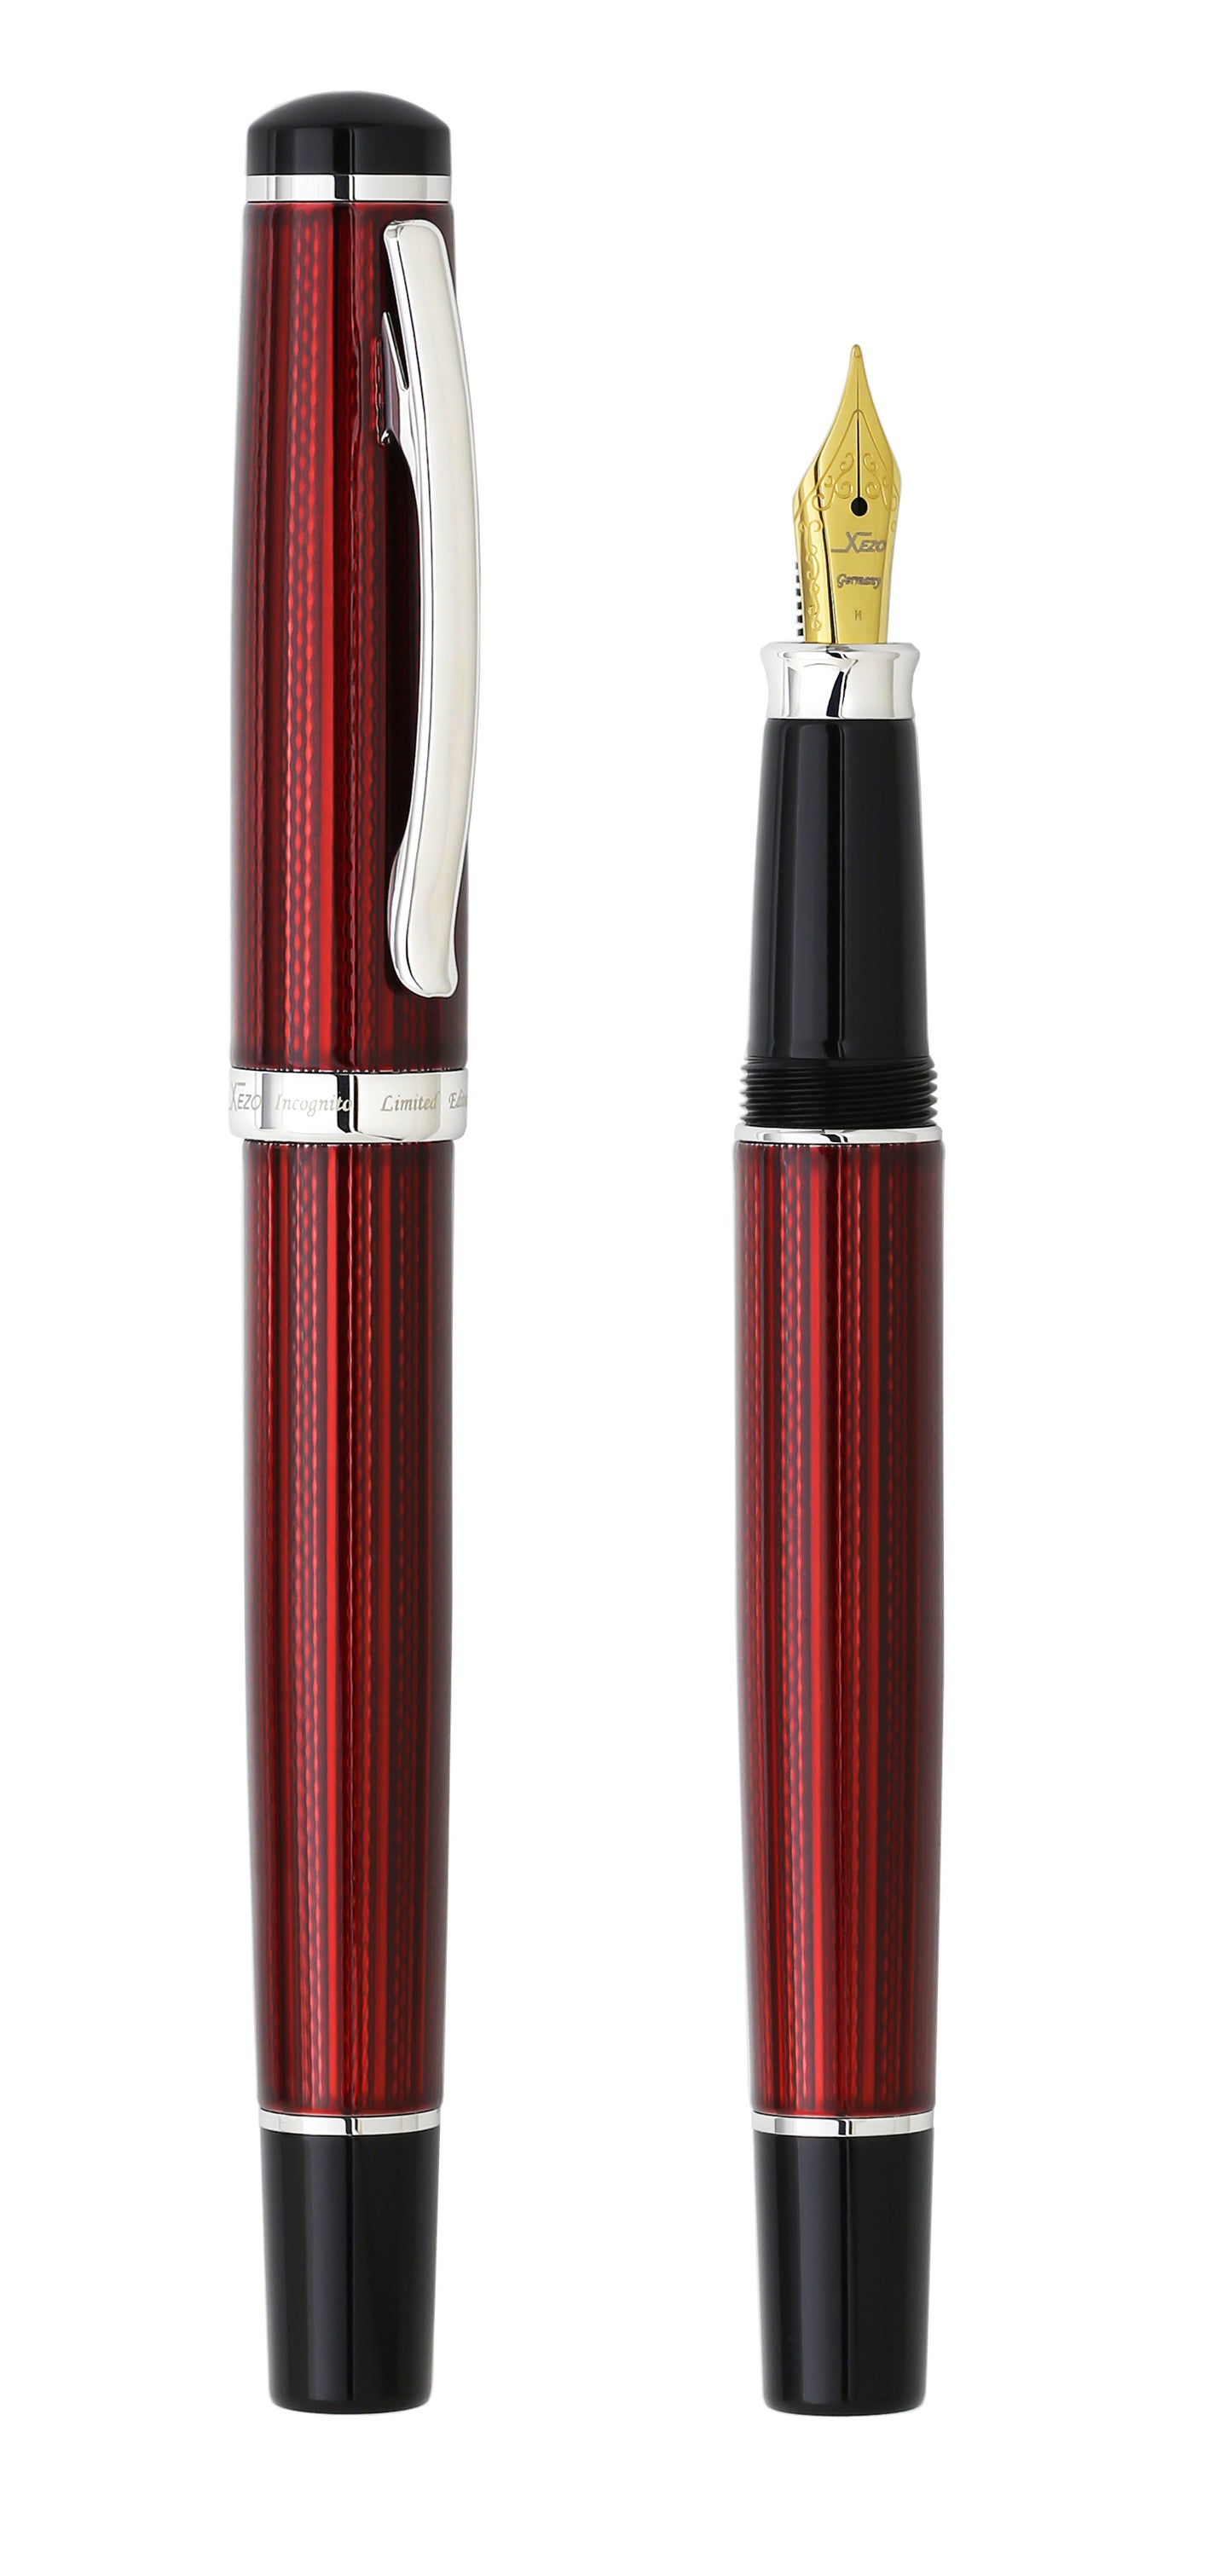 Xezo - Comparison between the angled view of the side of capped and uncapped Incognito Burgundy FM fountain pens